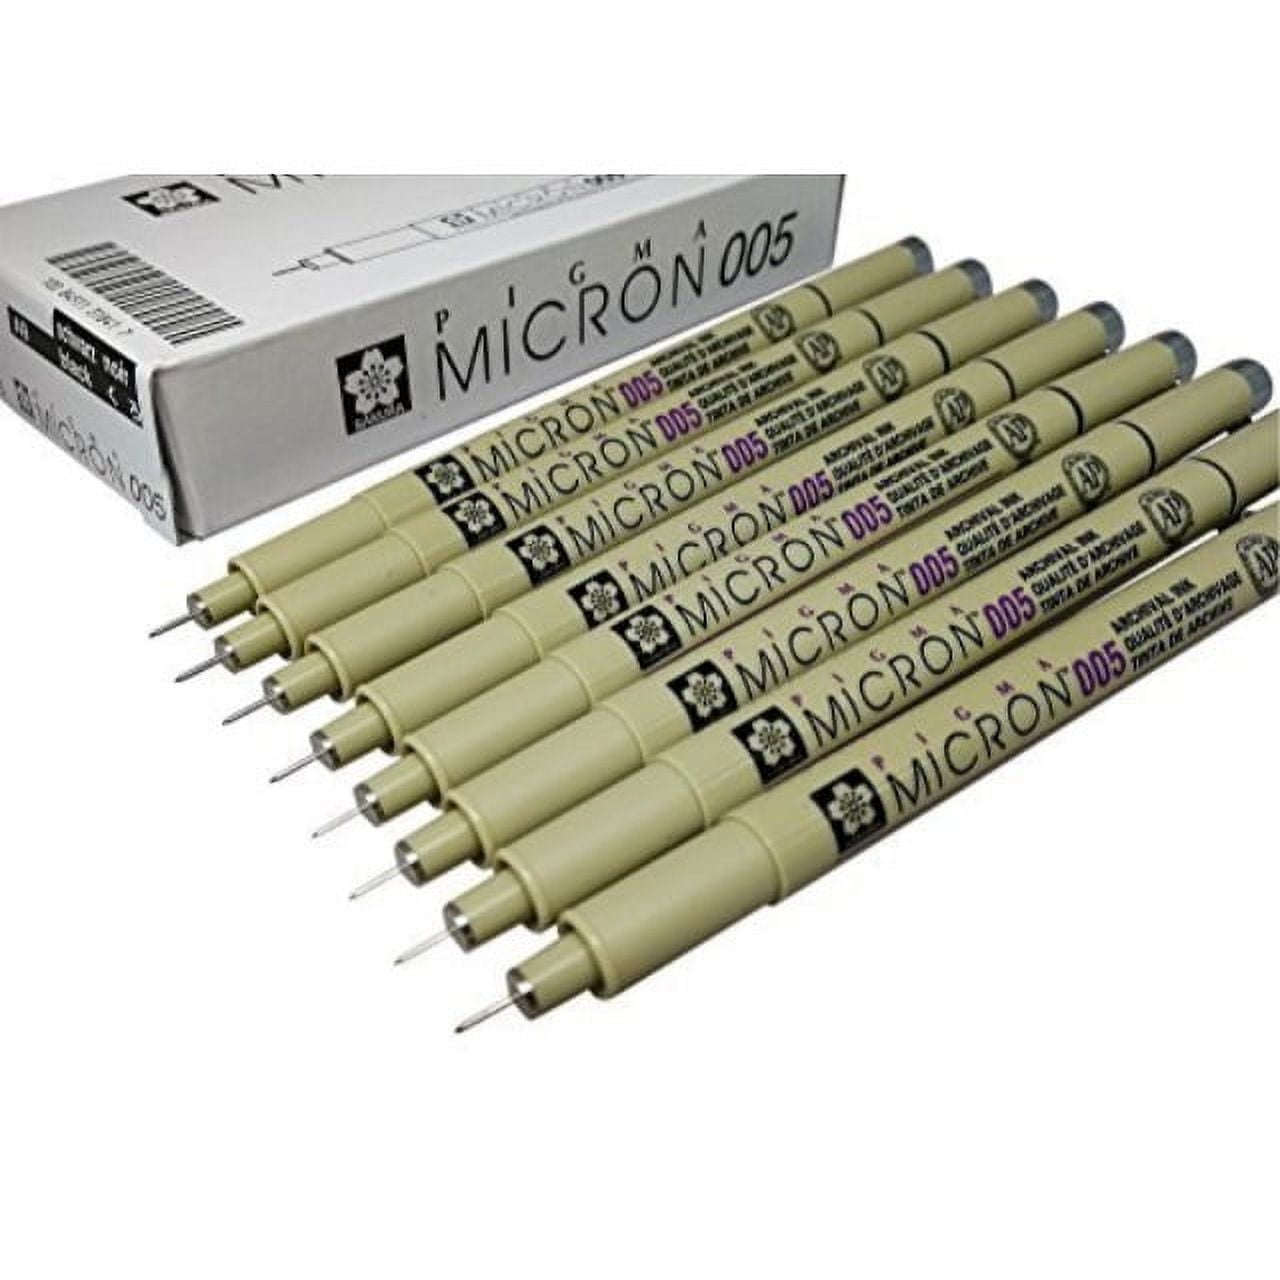  Pigma Sakura Micron - Pigment Fineliners 0.3Mm Black [Pack Of  3] : Arts, Crafts & Sewing